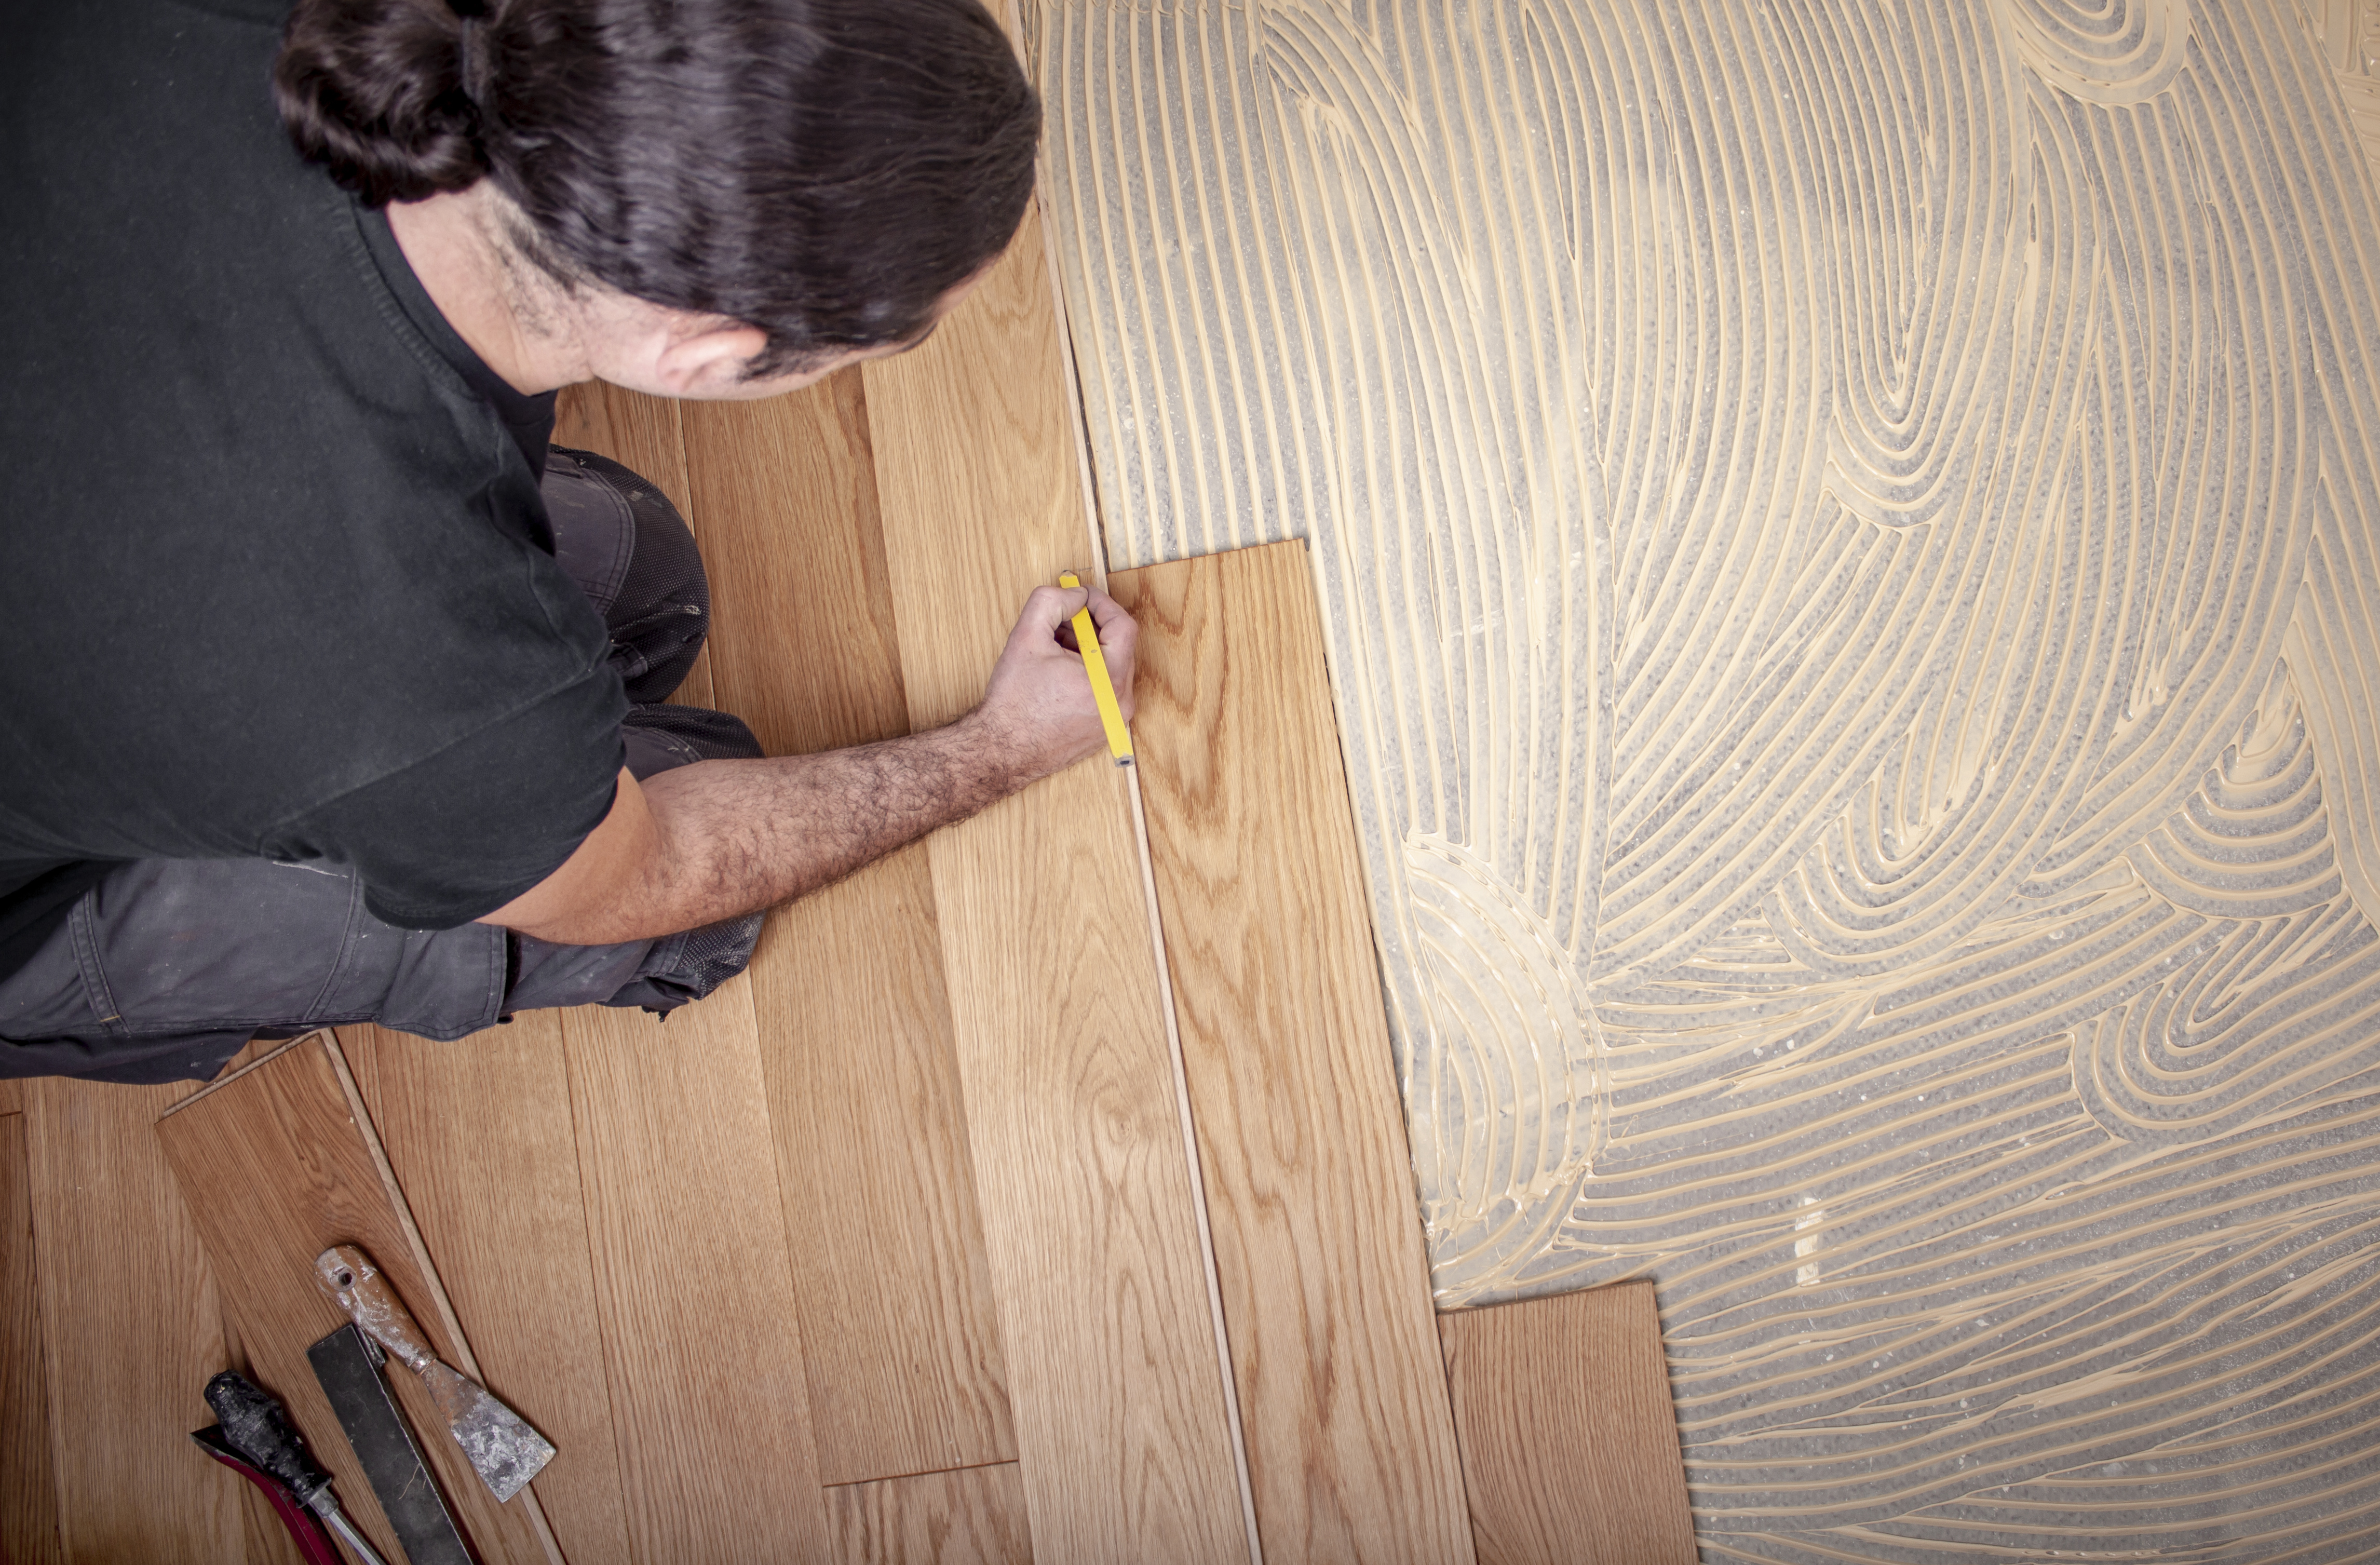 Glue Down Your Timber Floor, Is It Better To Glue Or Float An Engineered Wood Floor